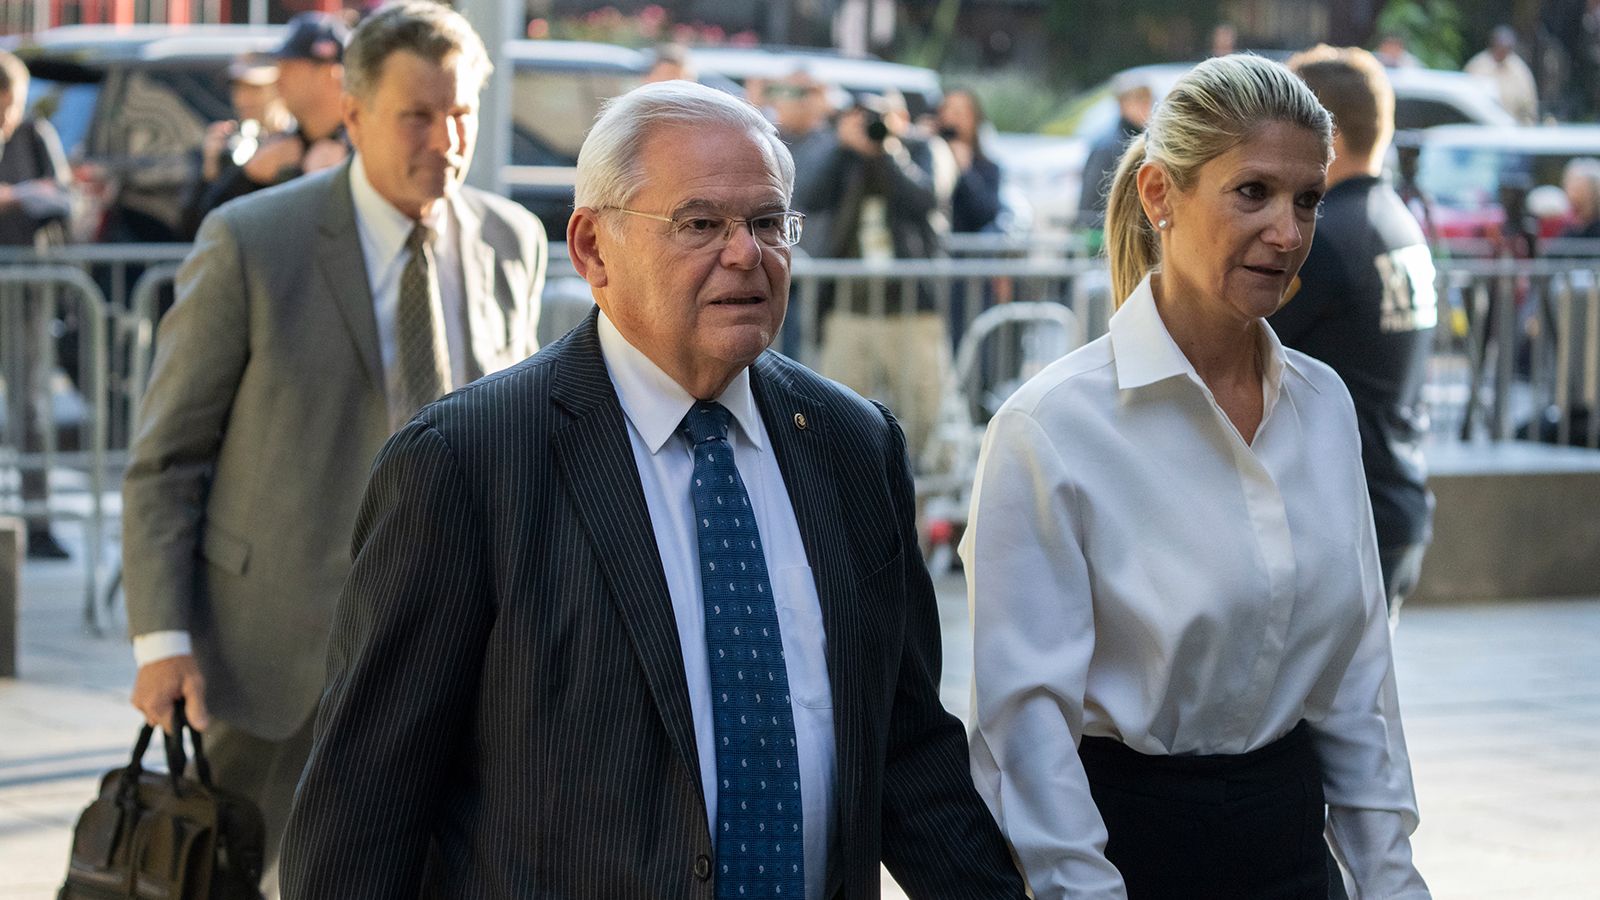 Democratic U.S. Sen. Bob Menendez of New Jersey and his wife Nadine Menendez arrive at a federal courthouse in New York on September 27, 2023.